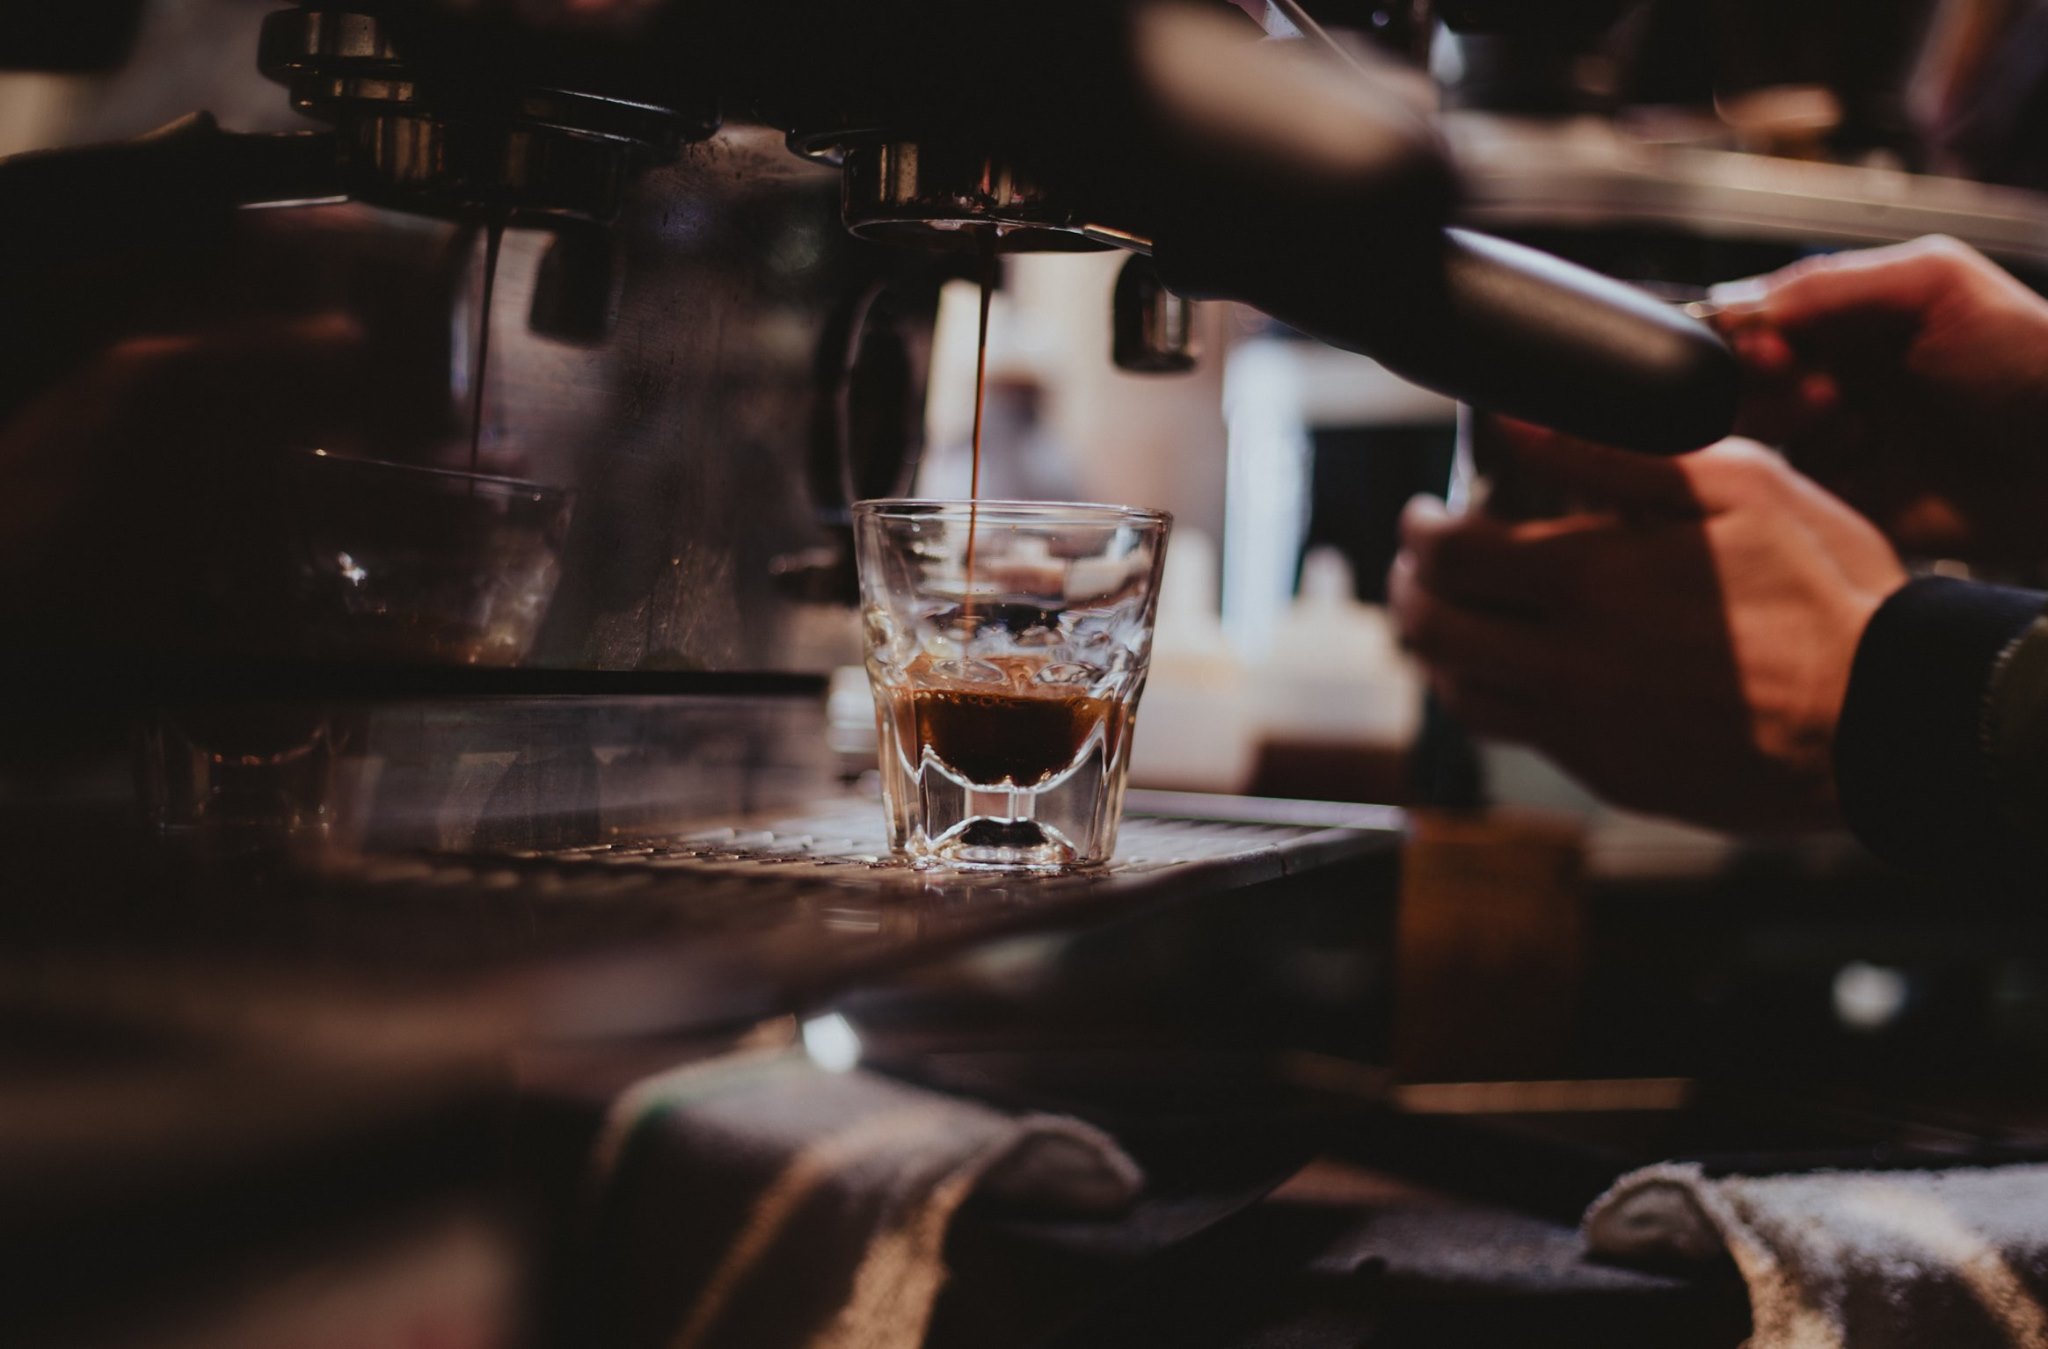 A closeup of a coffee drink being made as a barista works an espresso machine.